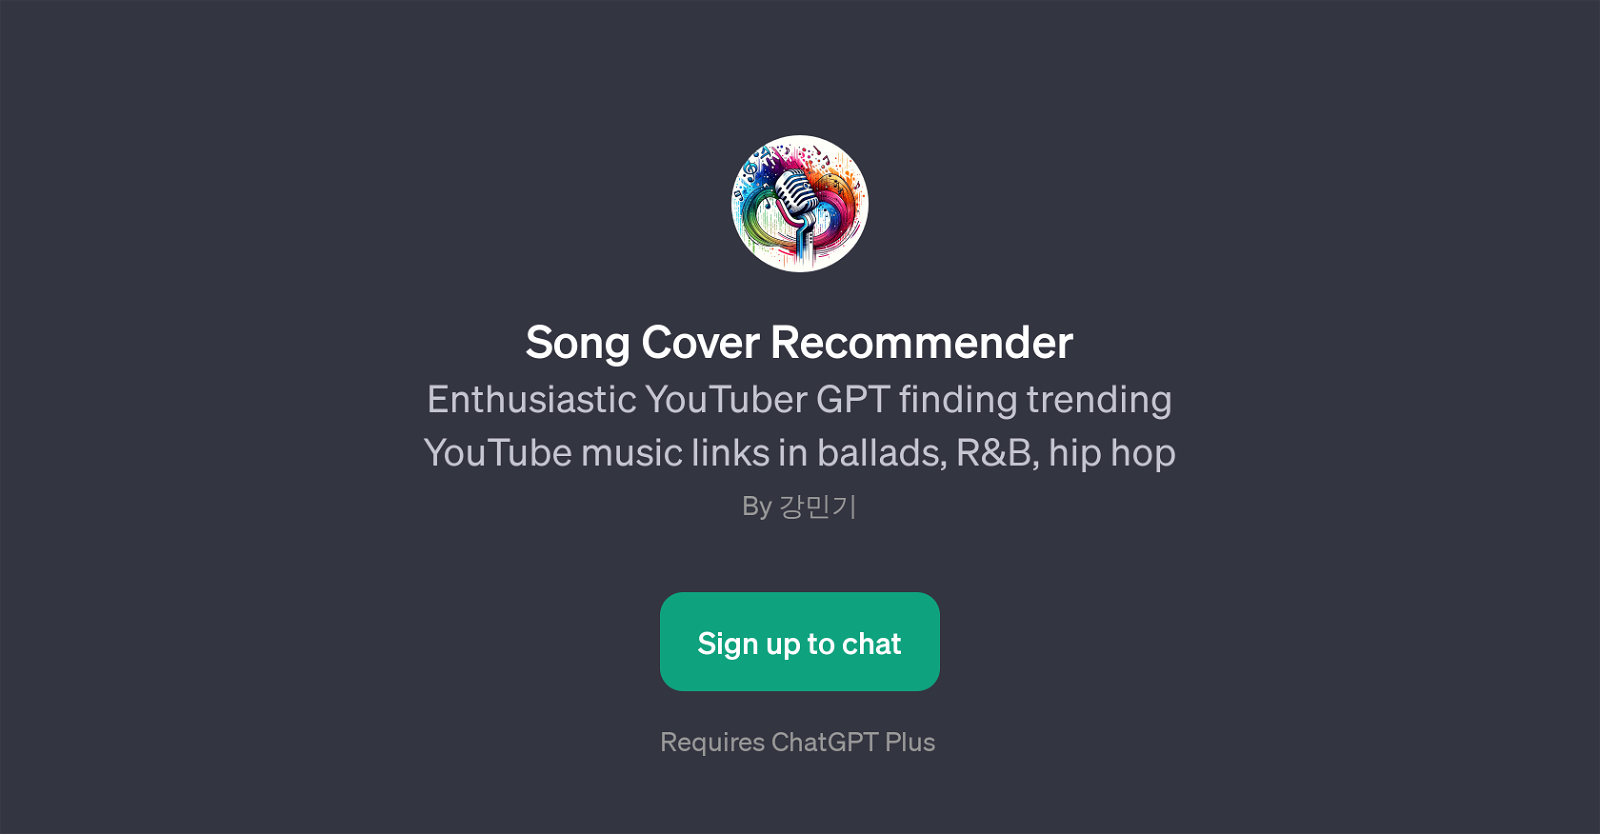 Song Cover Recommender website